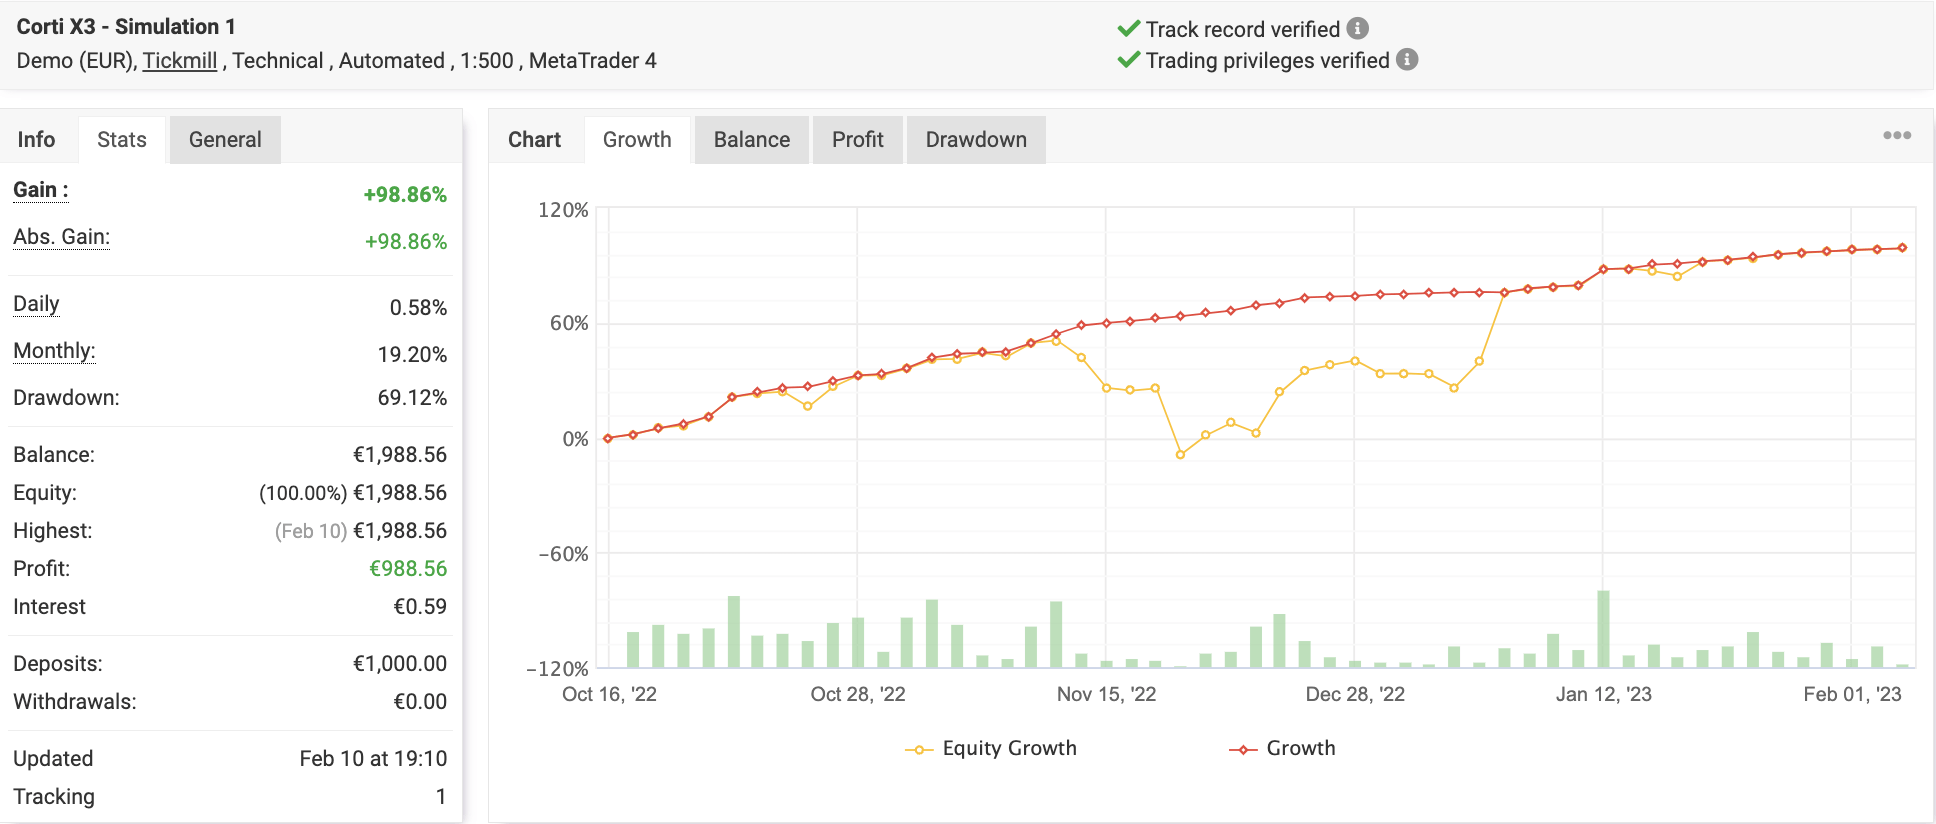 2nd Corti account almost 100% in profits